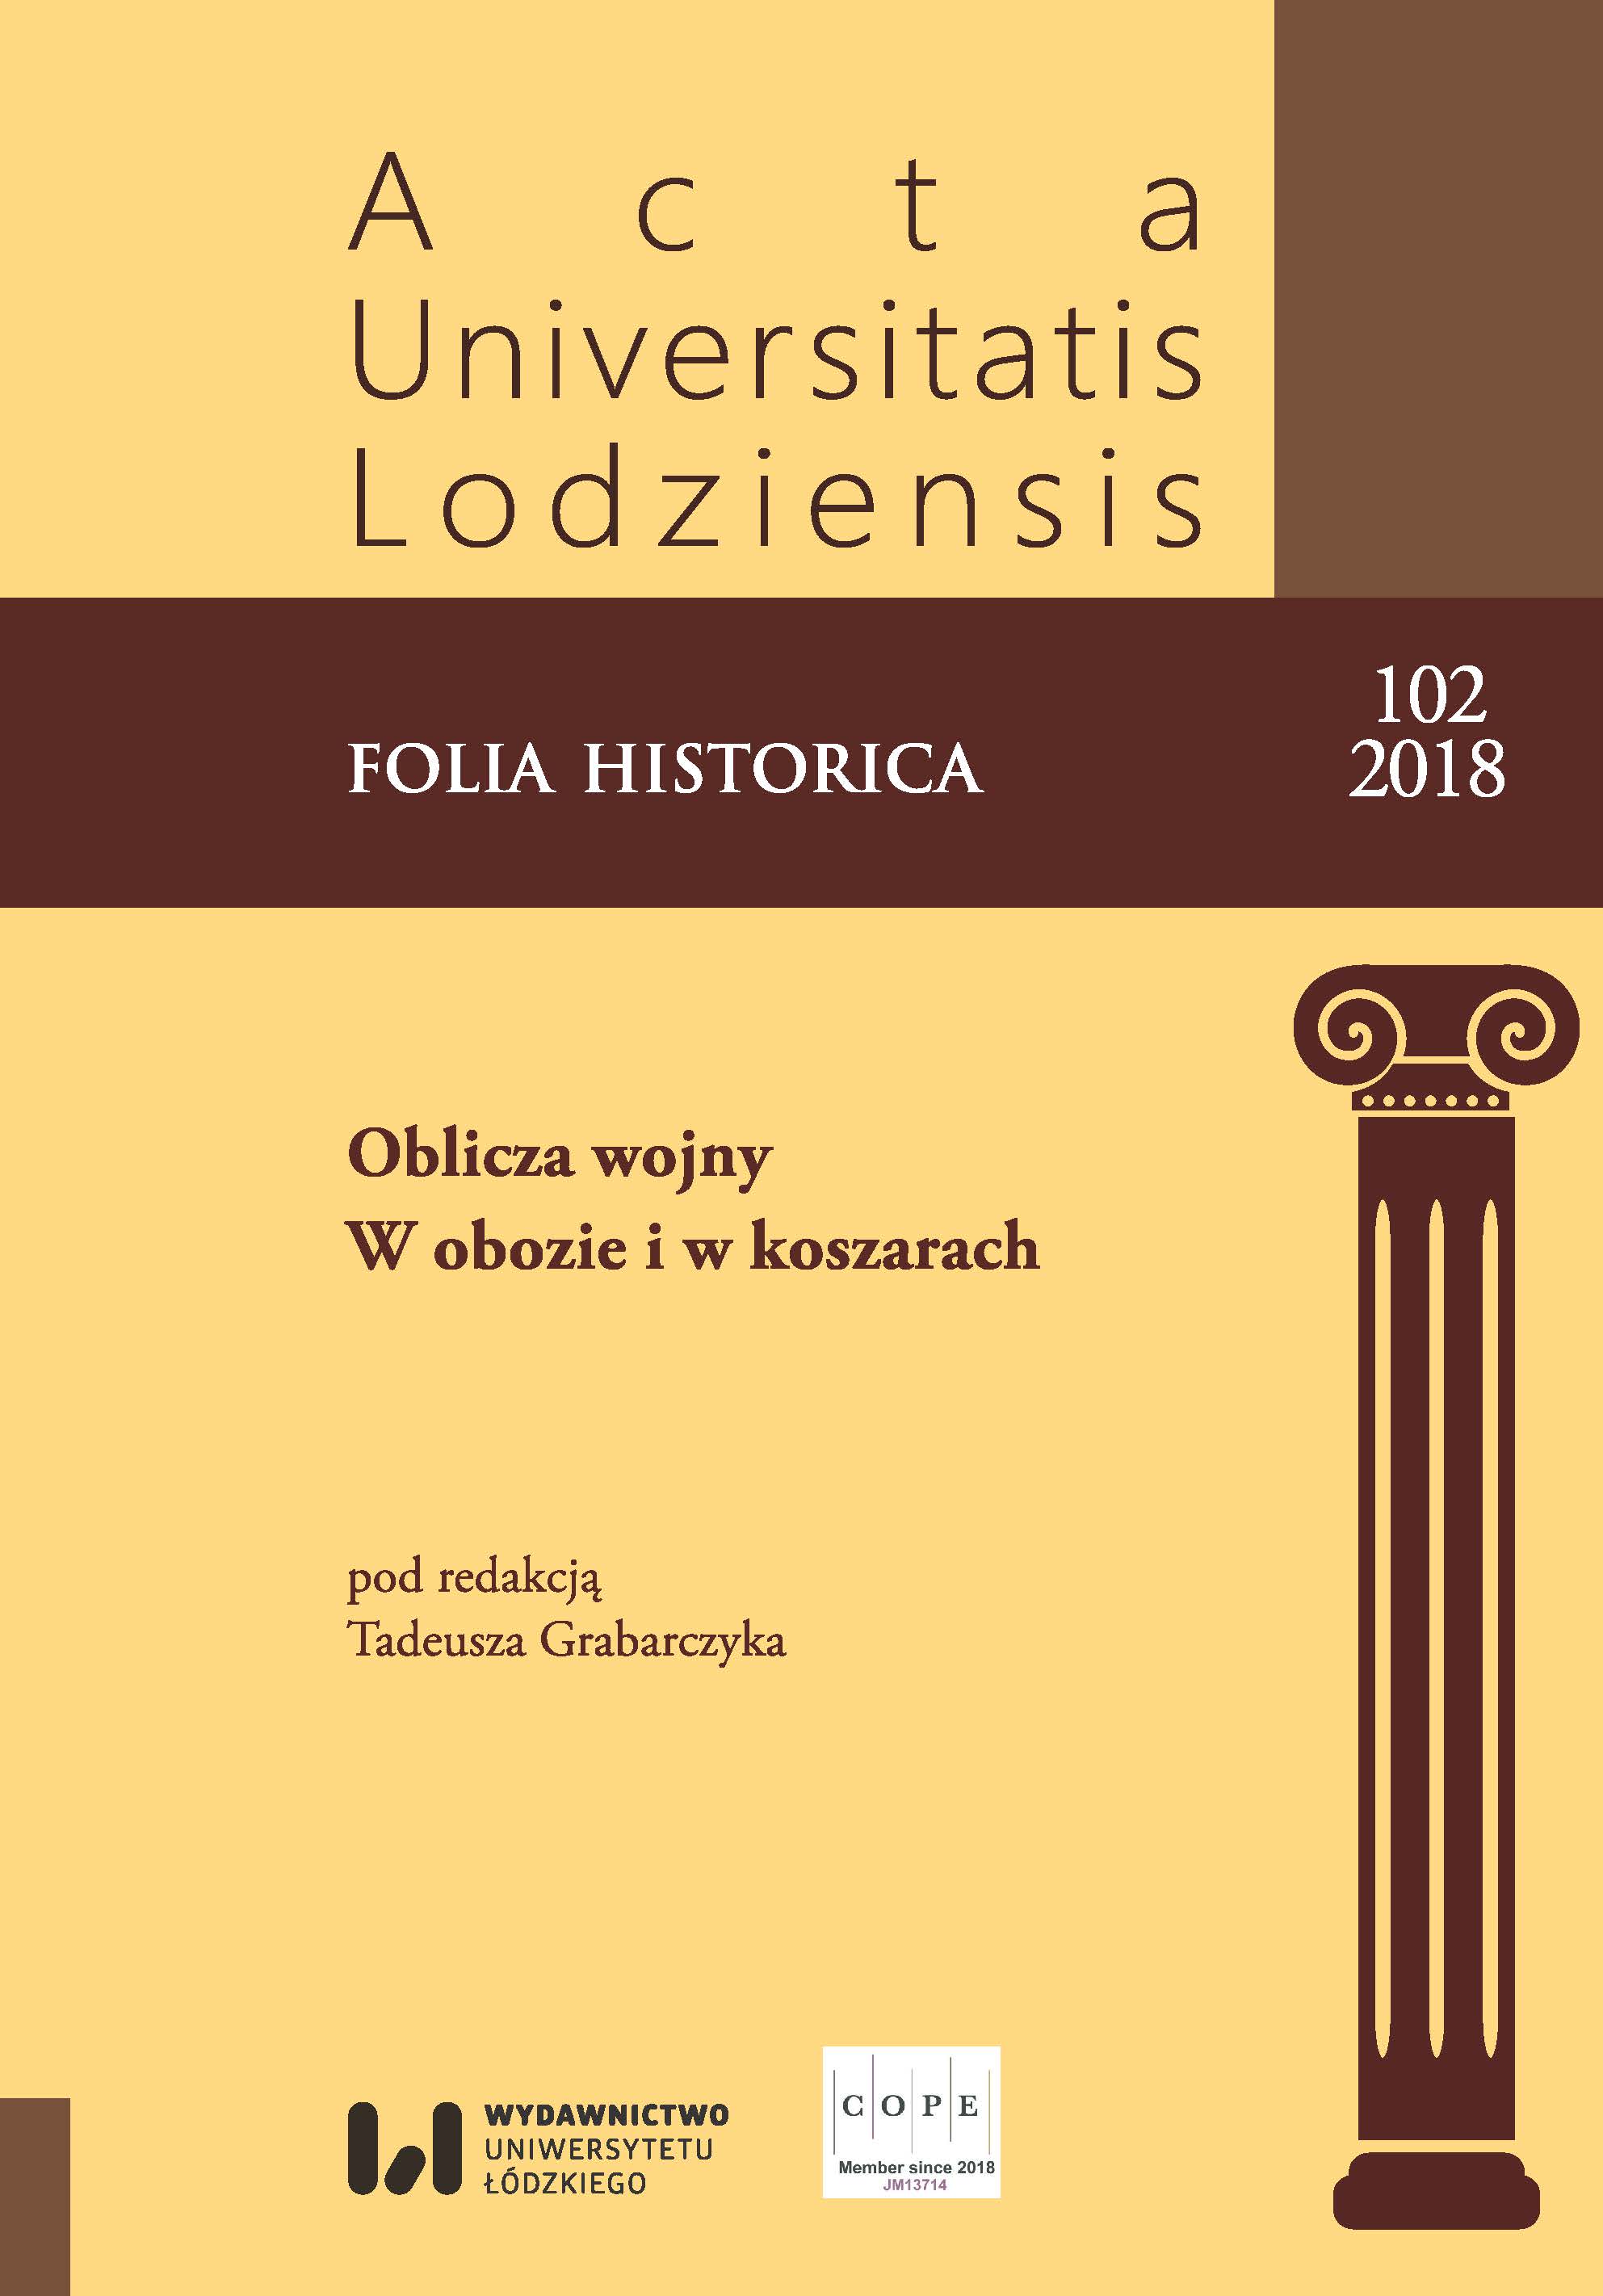 Diaries, daybooks and memoirs as sources for studies of daily lives of cavalrymen and horse artillerists of Polish military units from 1914–1918 and the Army of the Second Polish Republic Cover Image